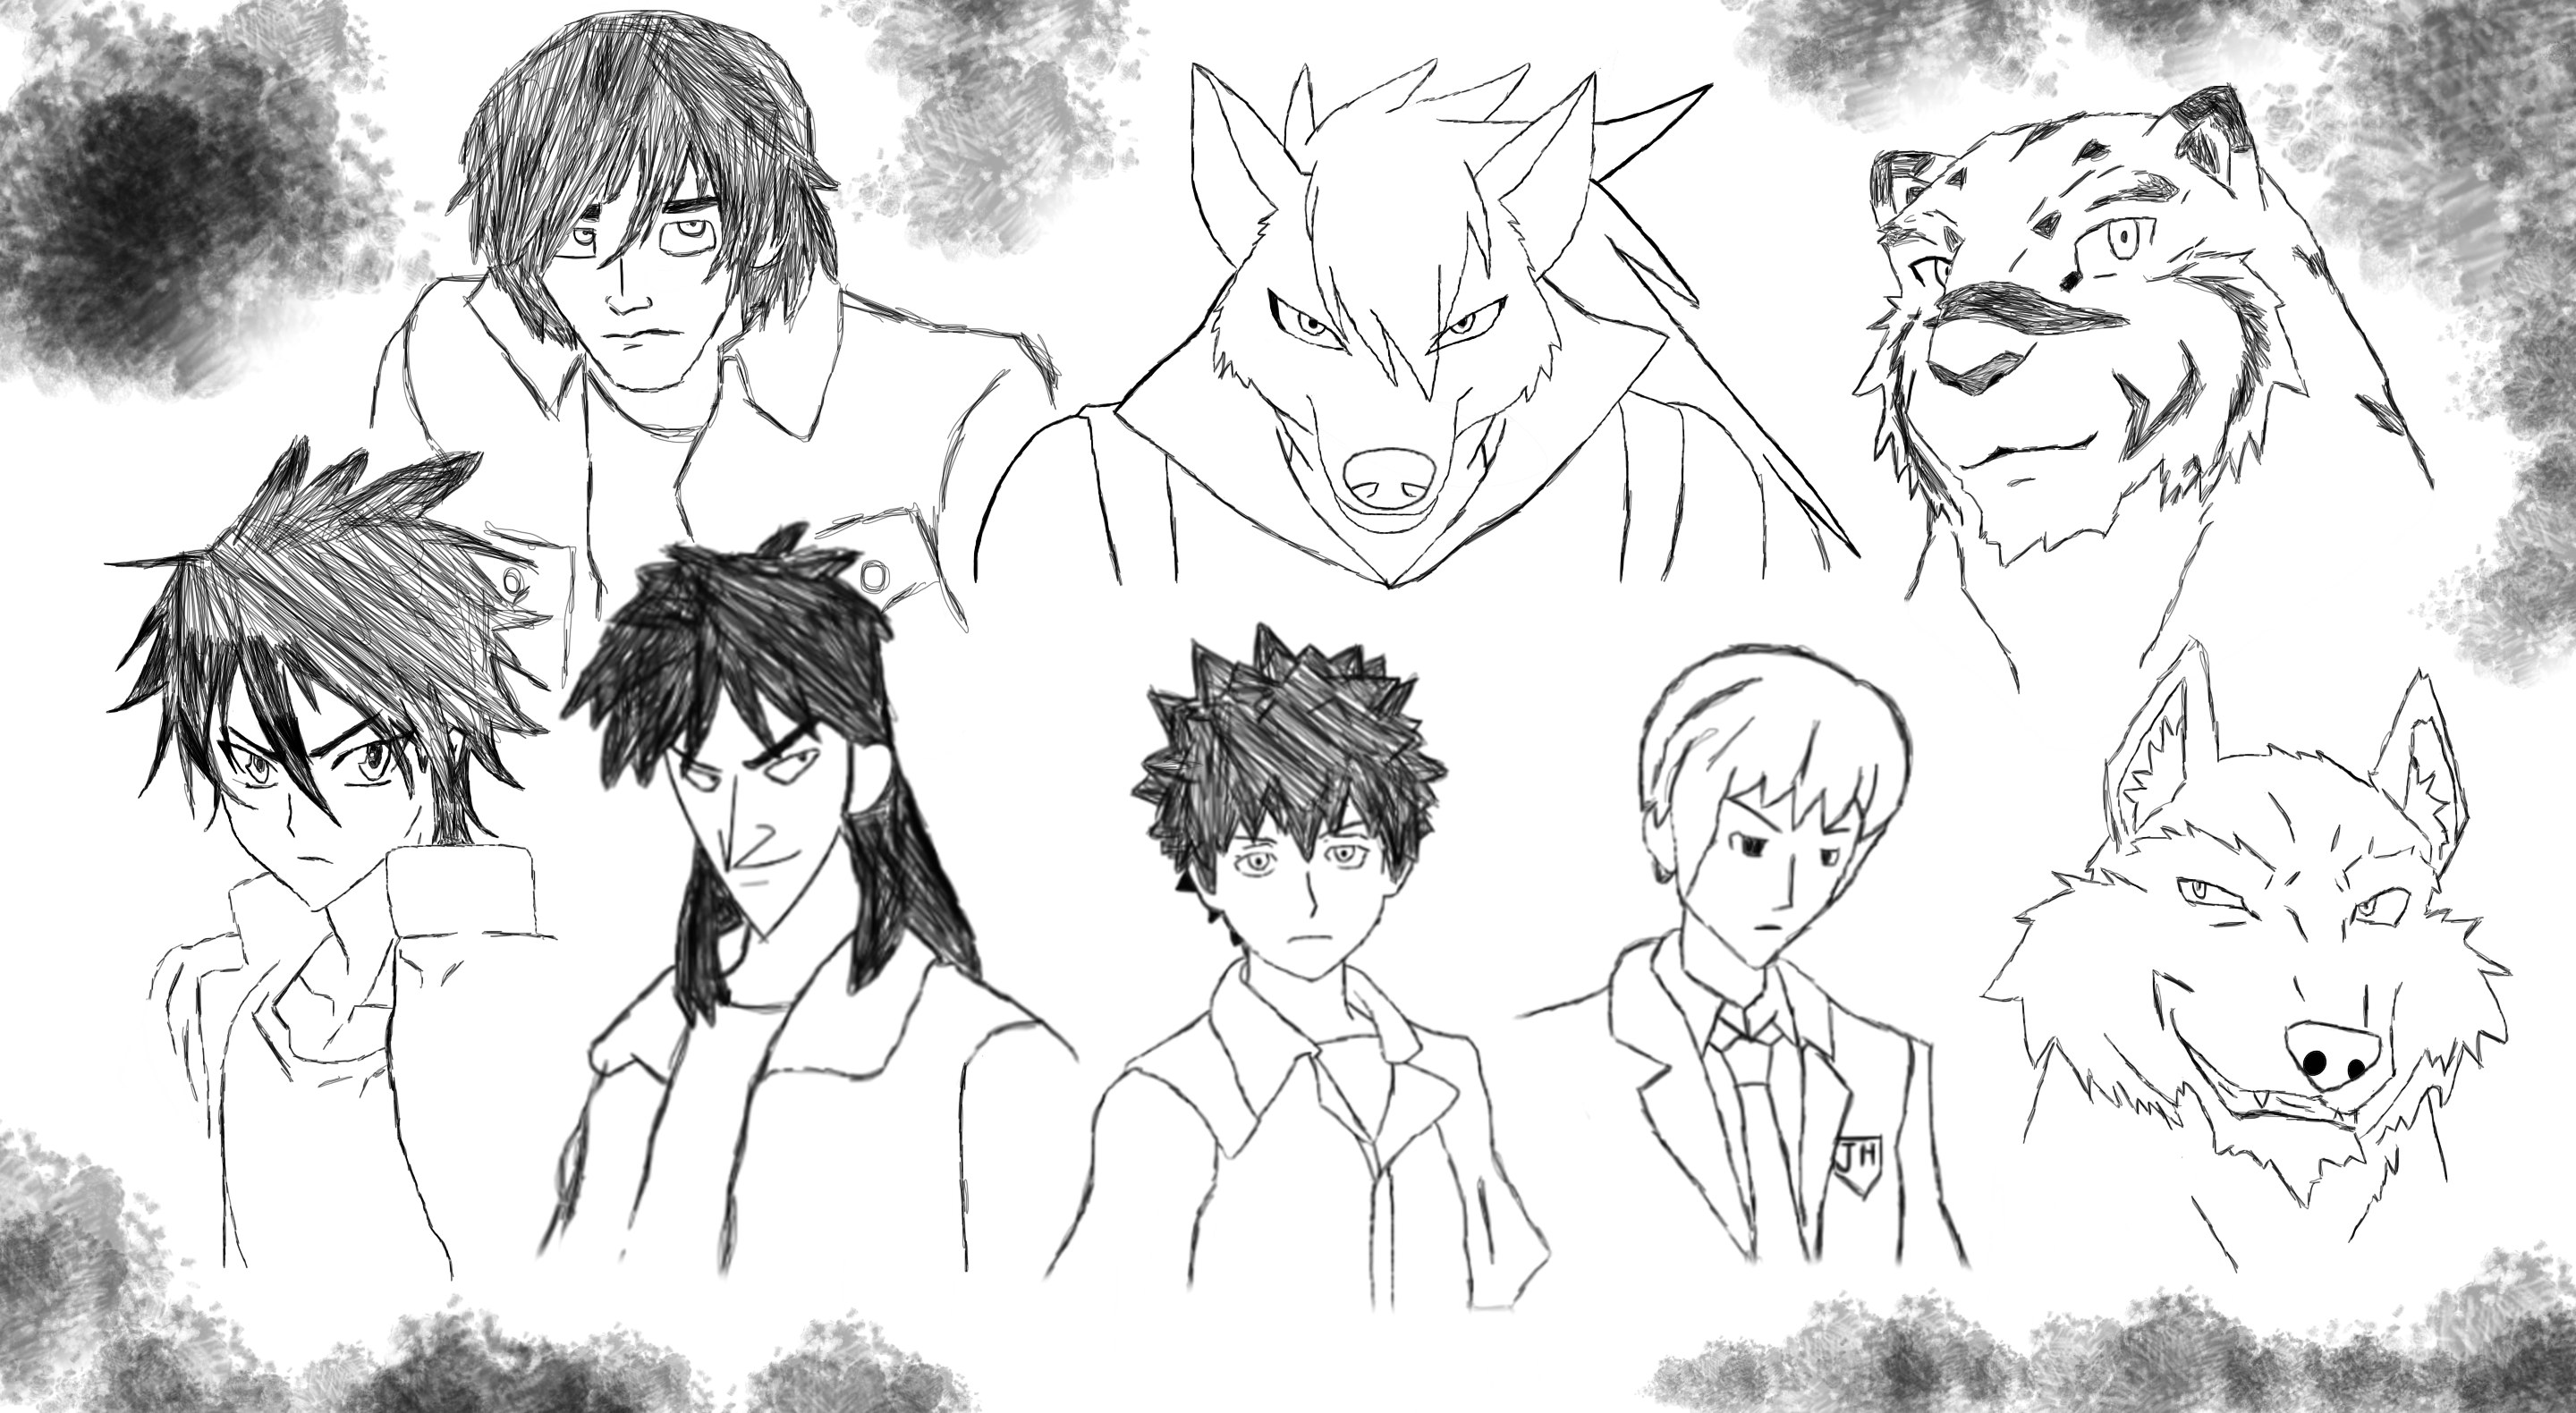 Anime Sketch Dump- 7 Heroes and 1 Villain by Wolfboy1020 on DeviantArt